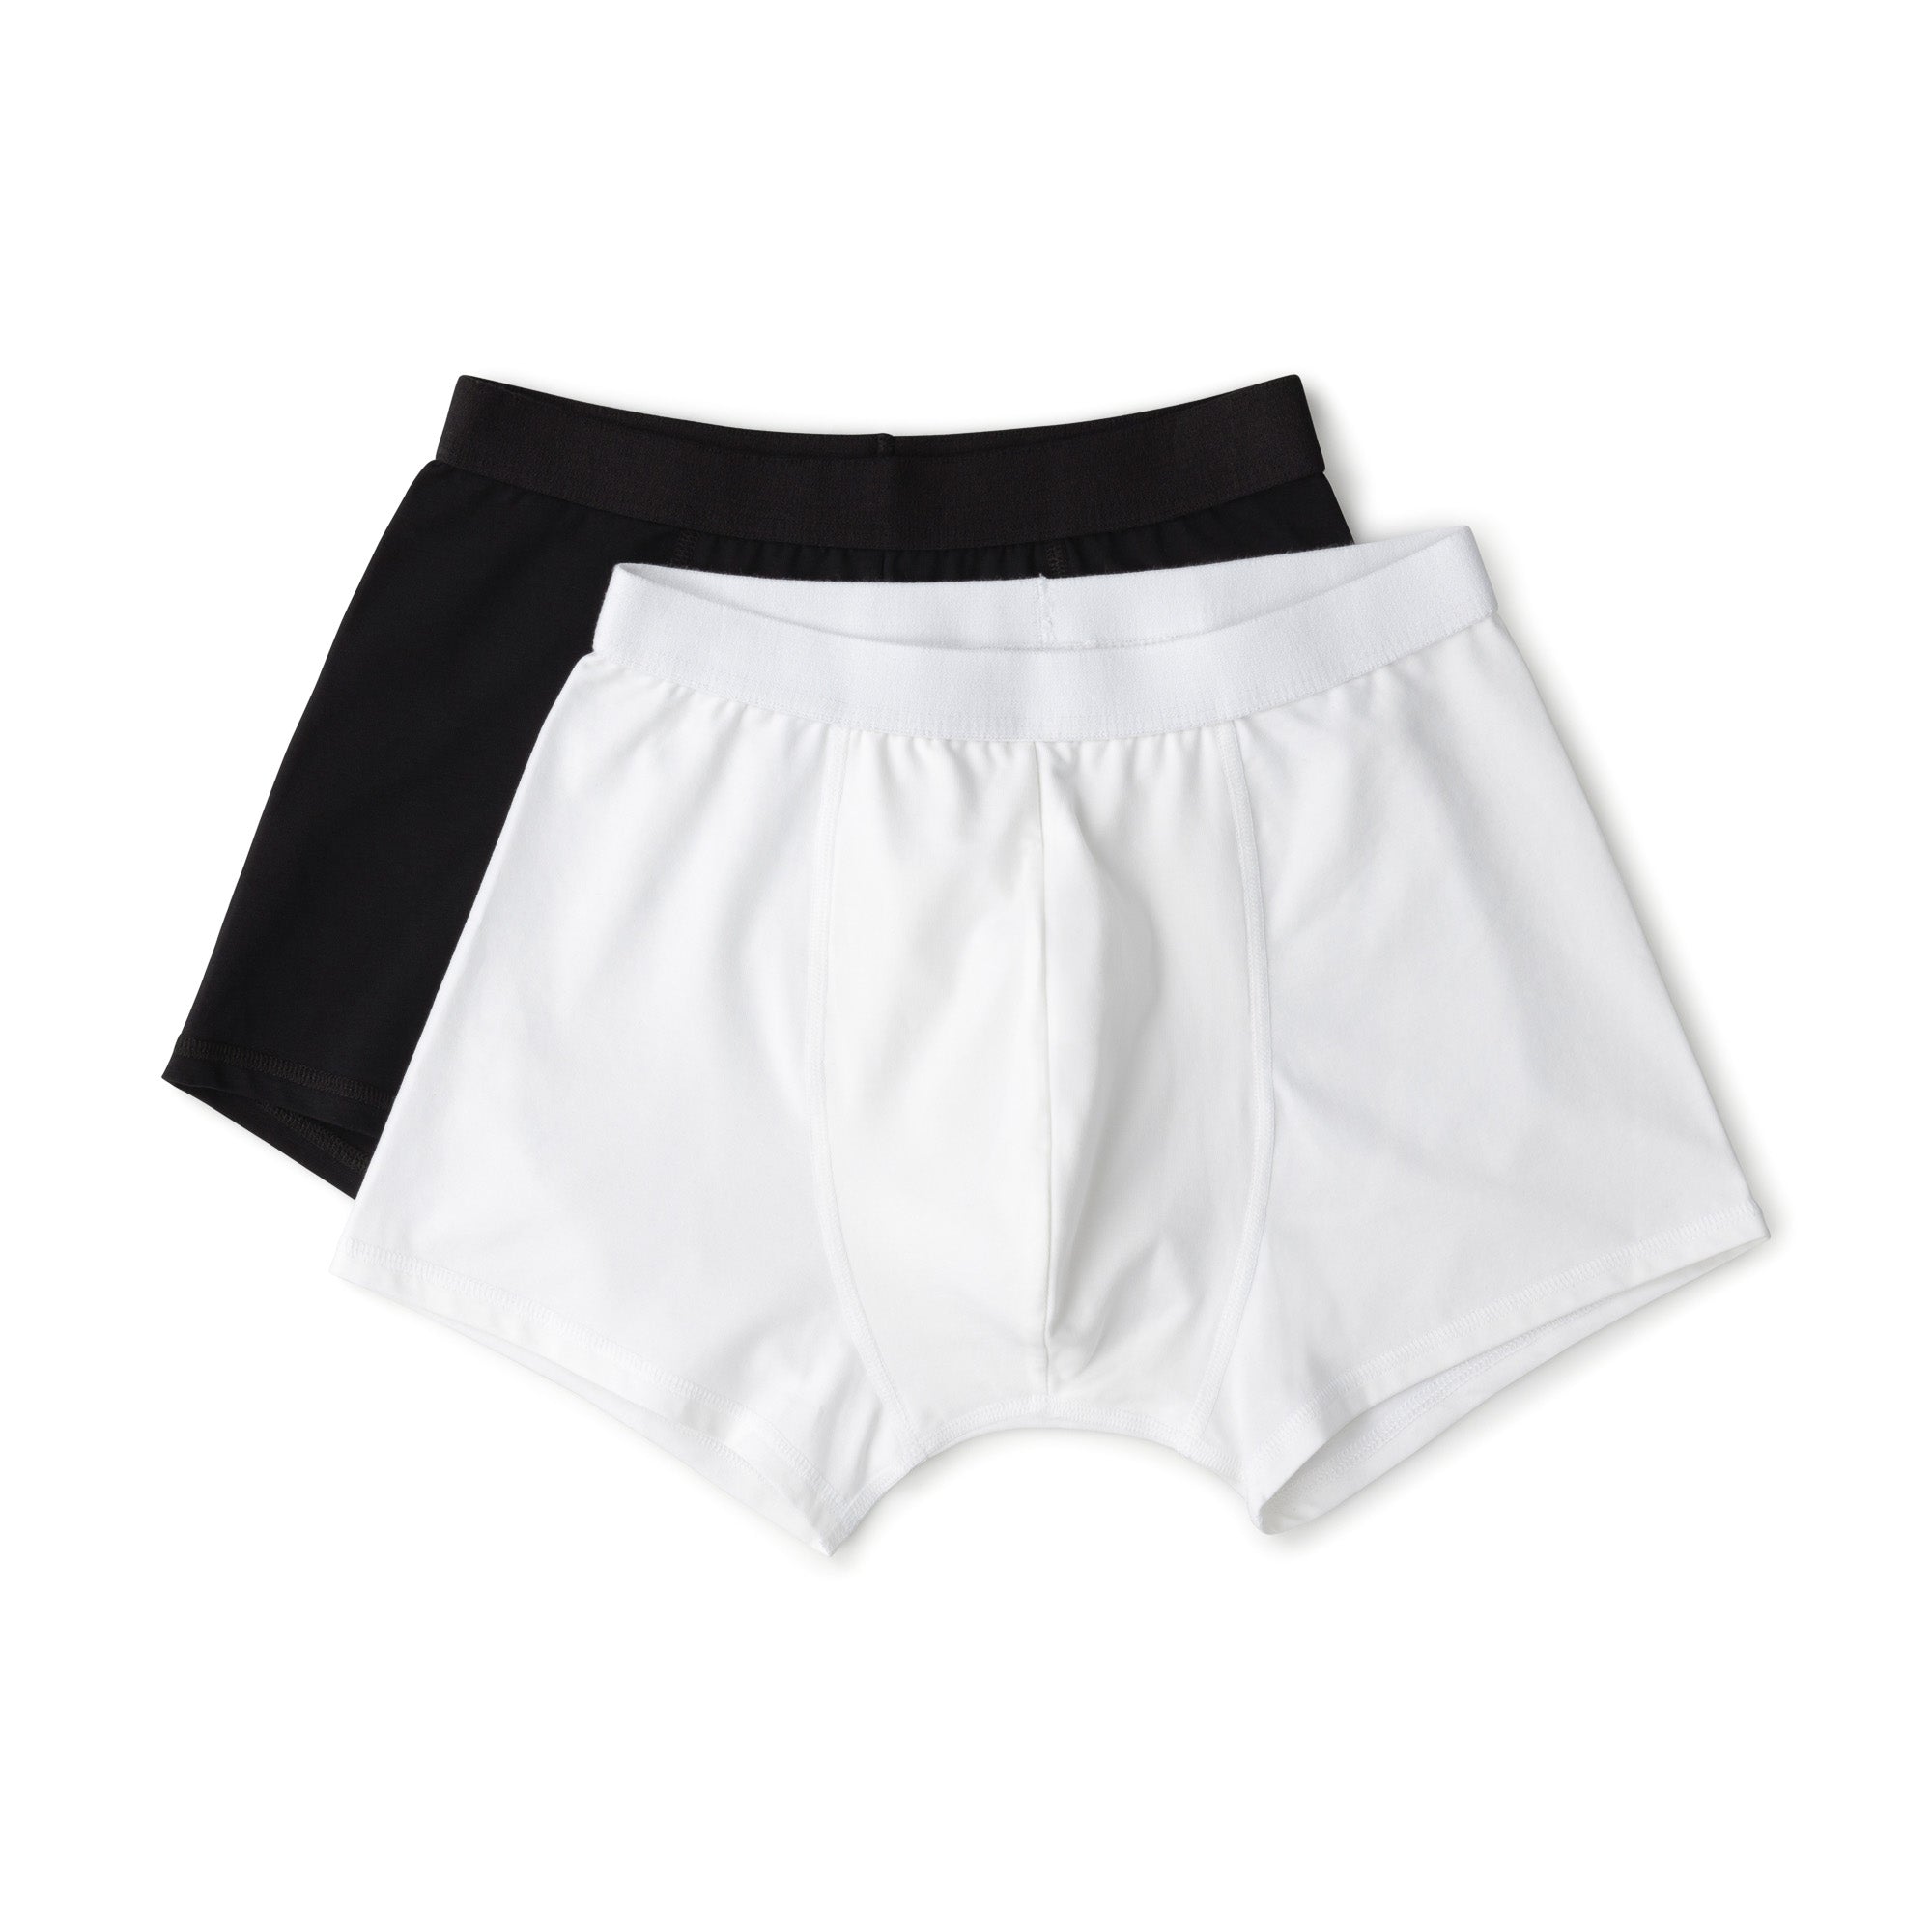 2 pack of white full briefs in organic cotton